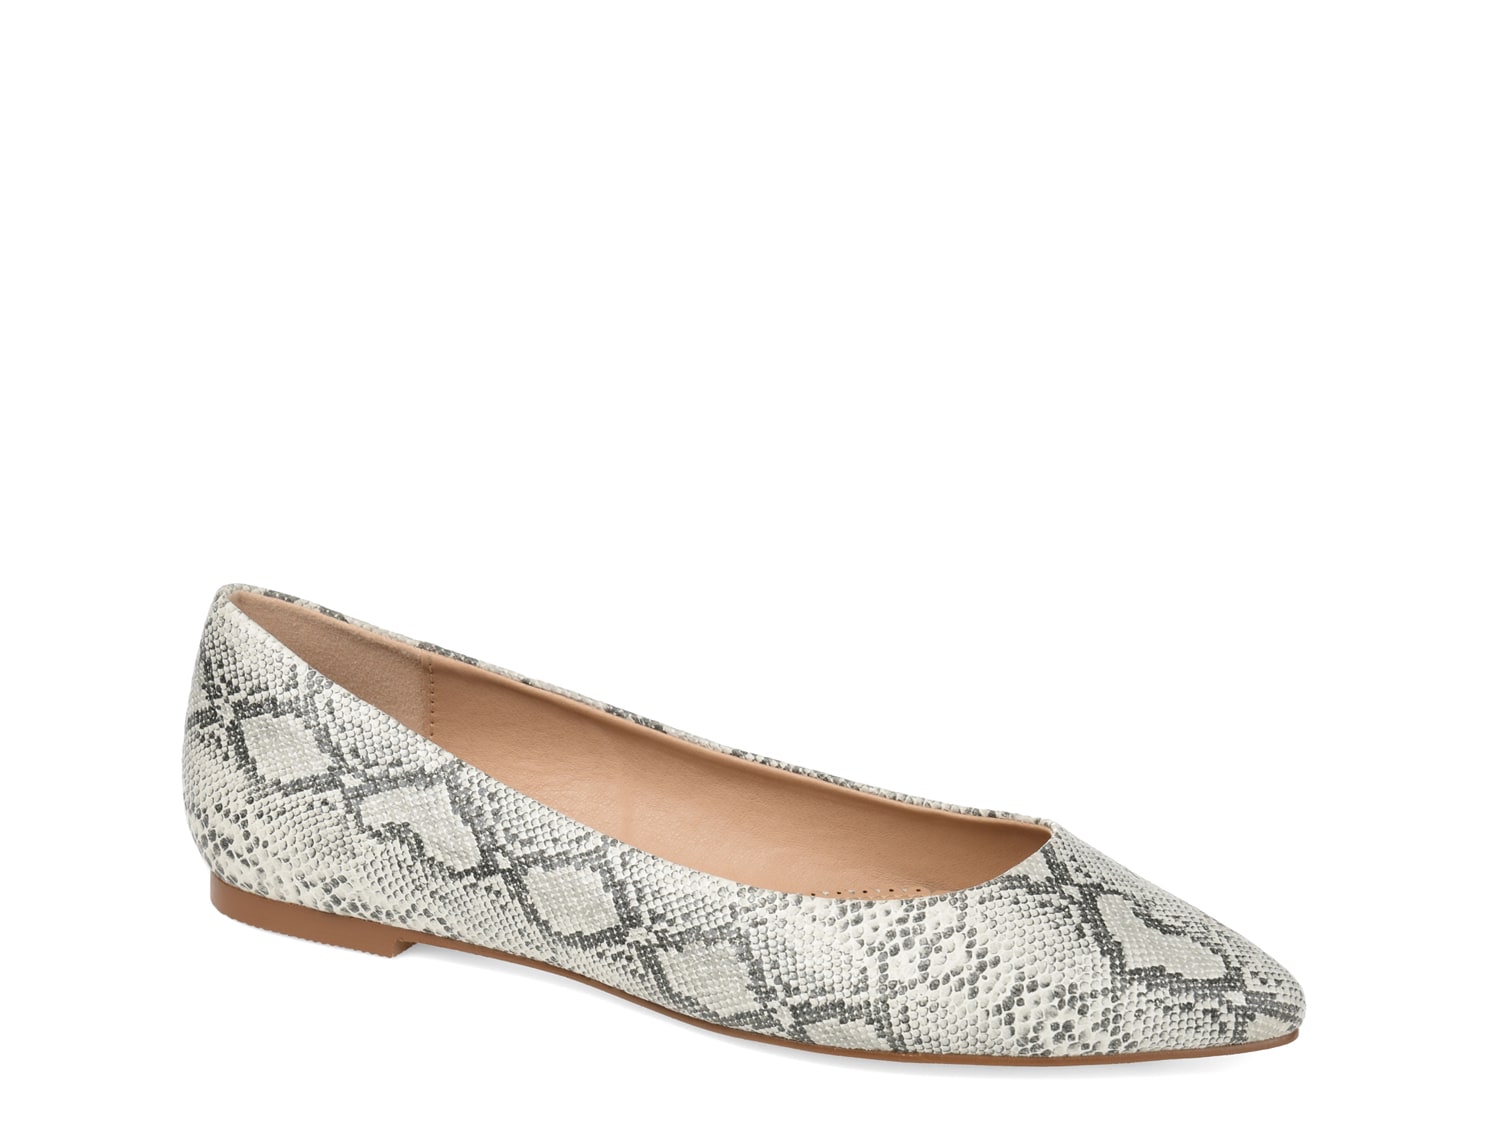 Journee Collection Moana Ballet Flat - Free Shipping | DSW